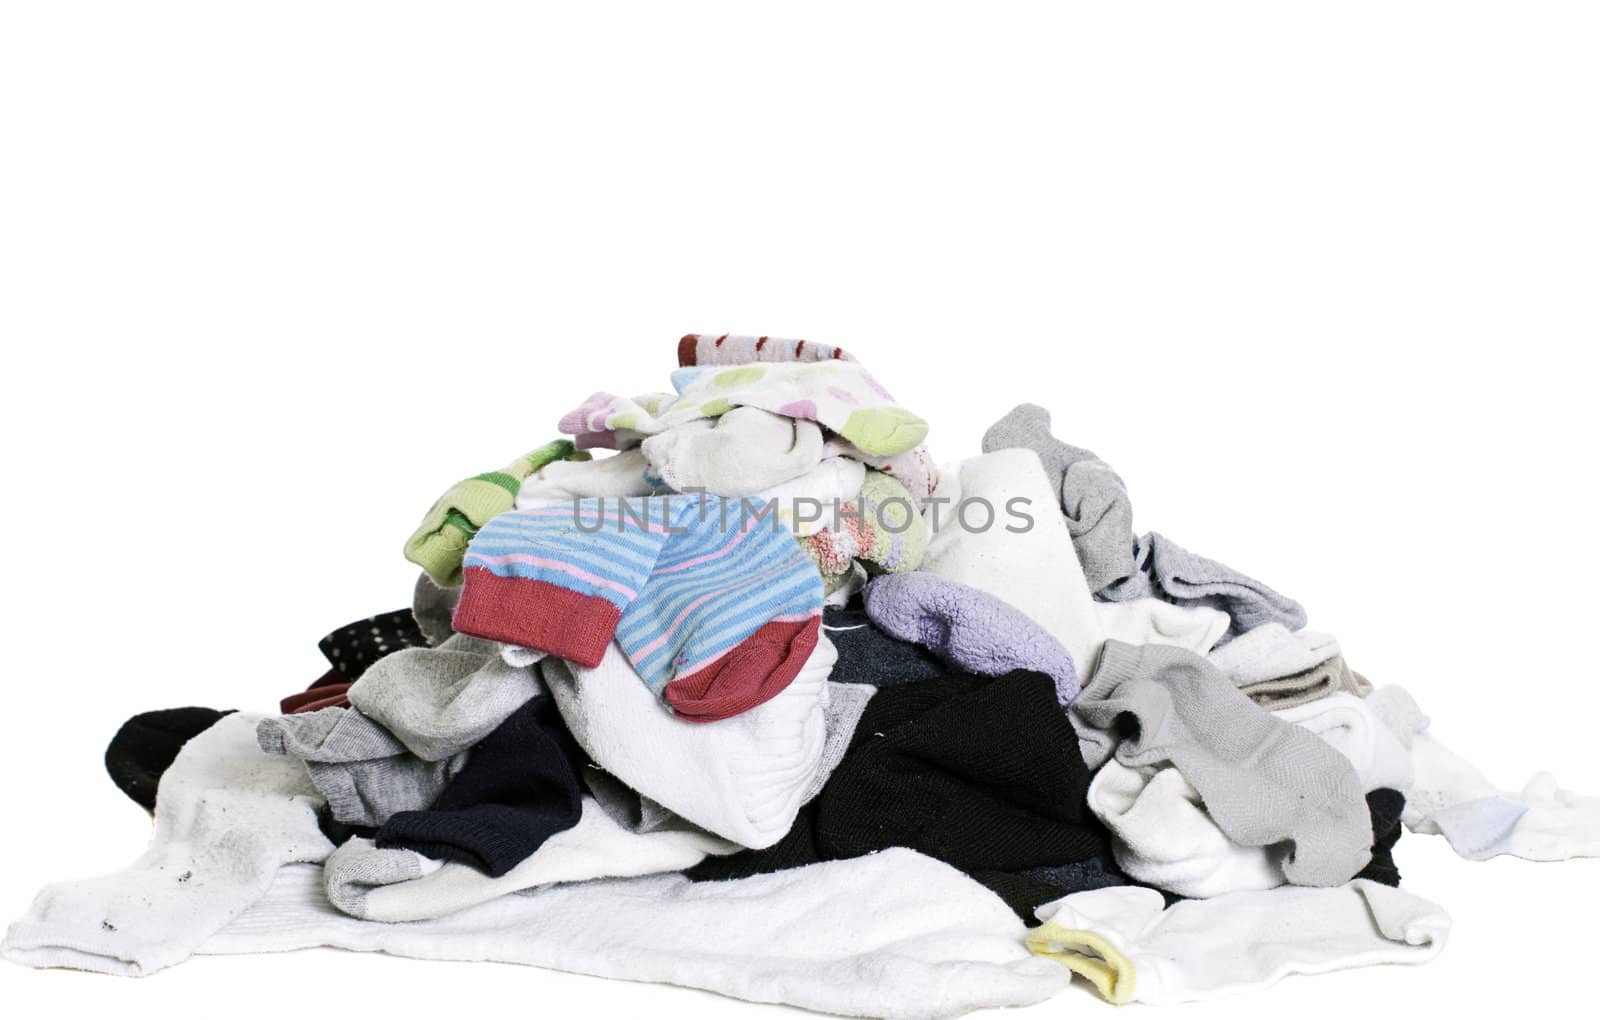 A pile of unsorted socks, isolated against a white background